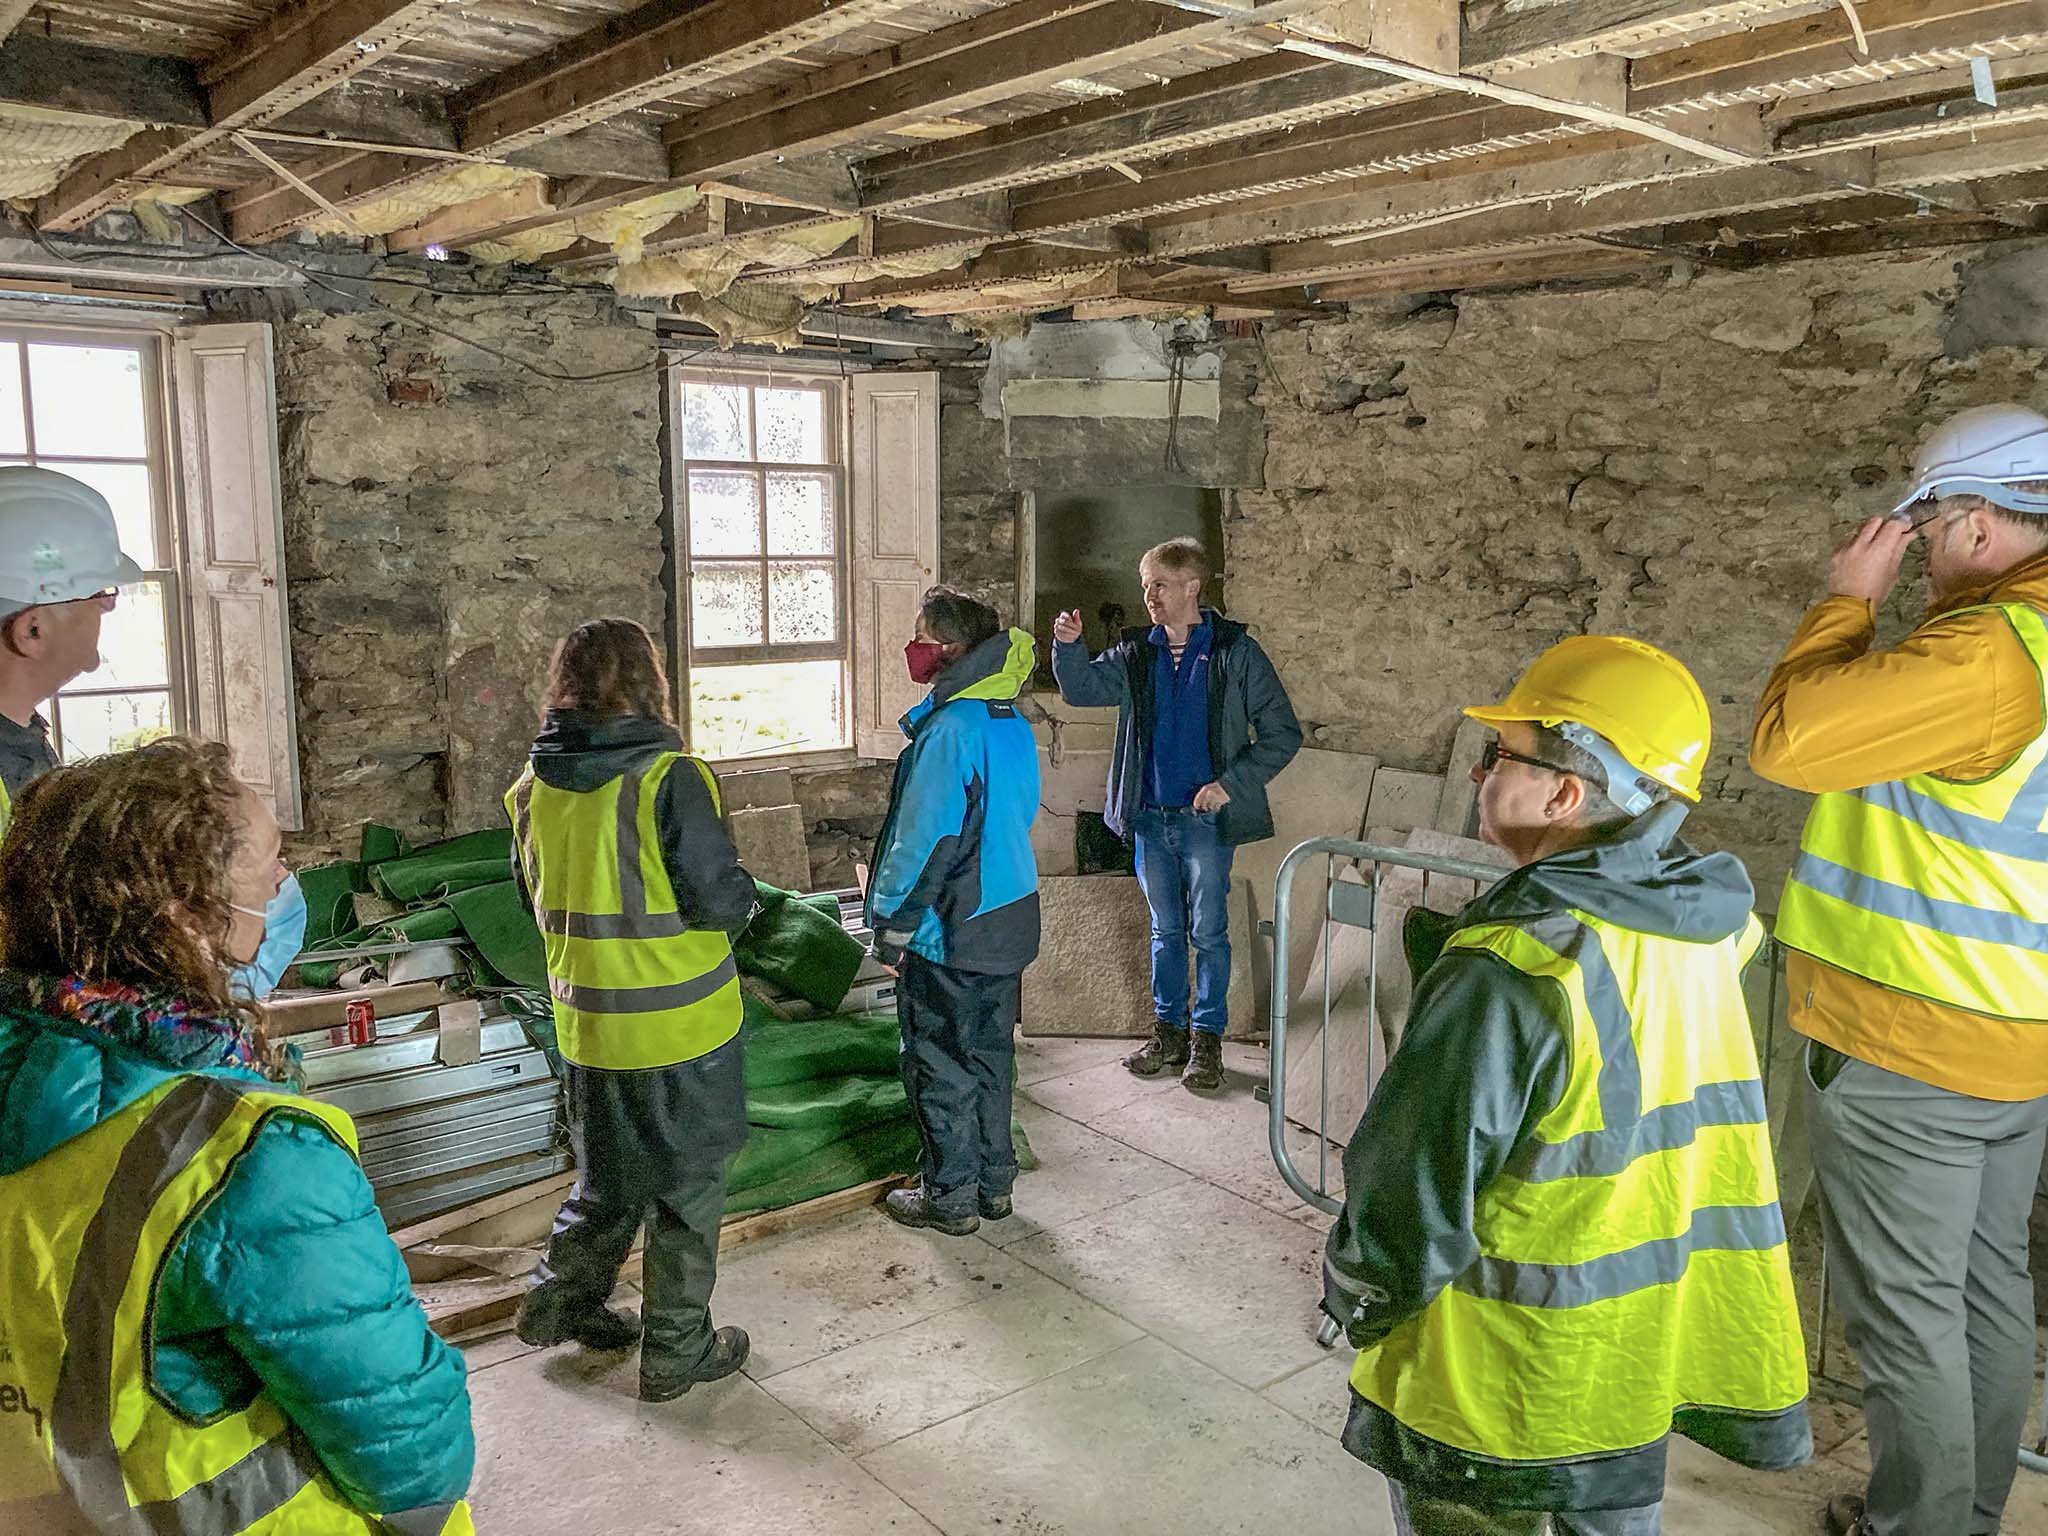  Museum staff reminisce within what remains of the old Museum Gallery. 